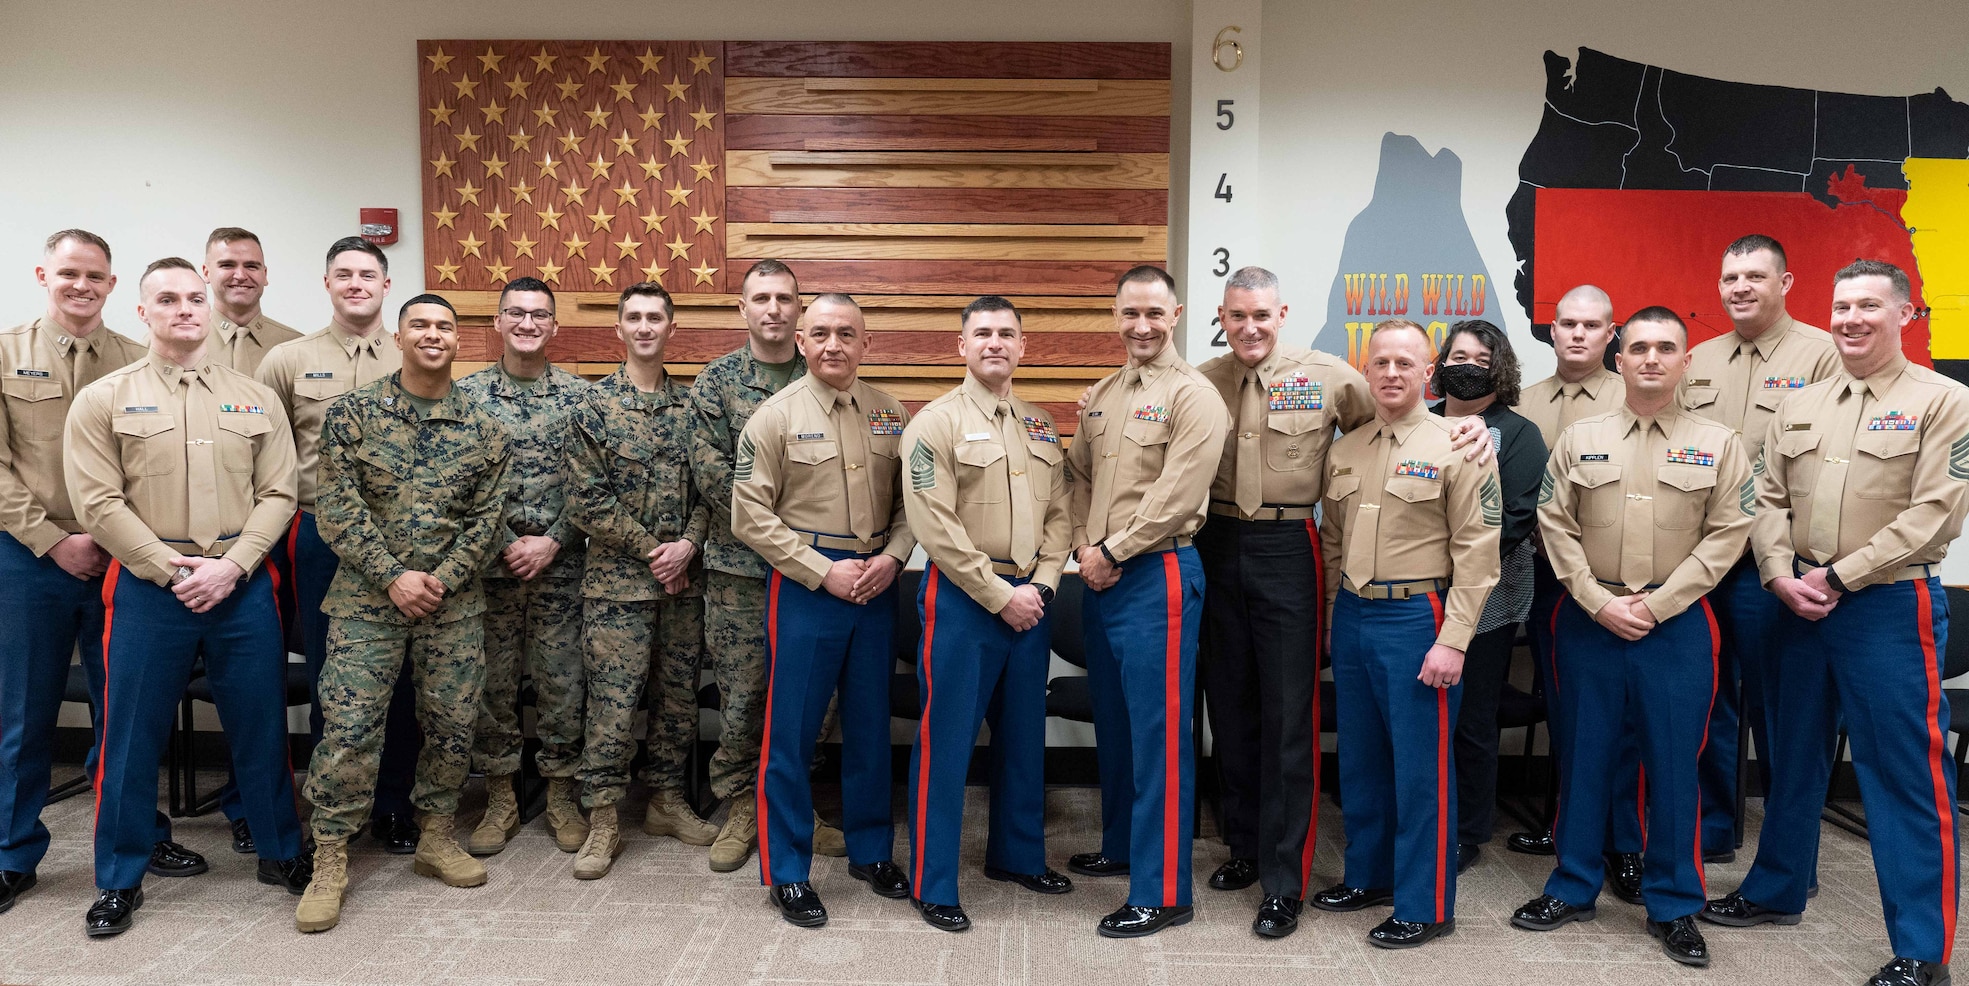 Major General Jason Q. Bohm poses for a photo with the headquarters element of Recruiting Station Des Moines, Iowa, Mar. 23, 2022. Bohm visited the Marines of RS Des Moines, apart of his tour across the 9th Marine Corps District. (U.S. Marine Corps photo by Staff Sgt. Timothy Smithers)